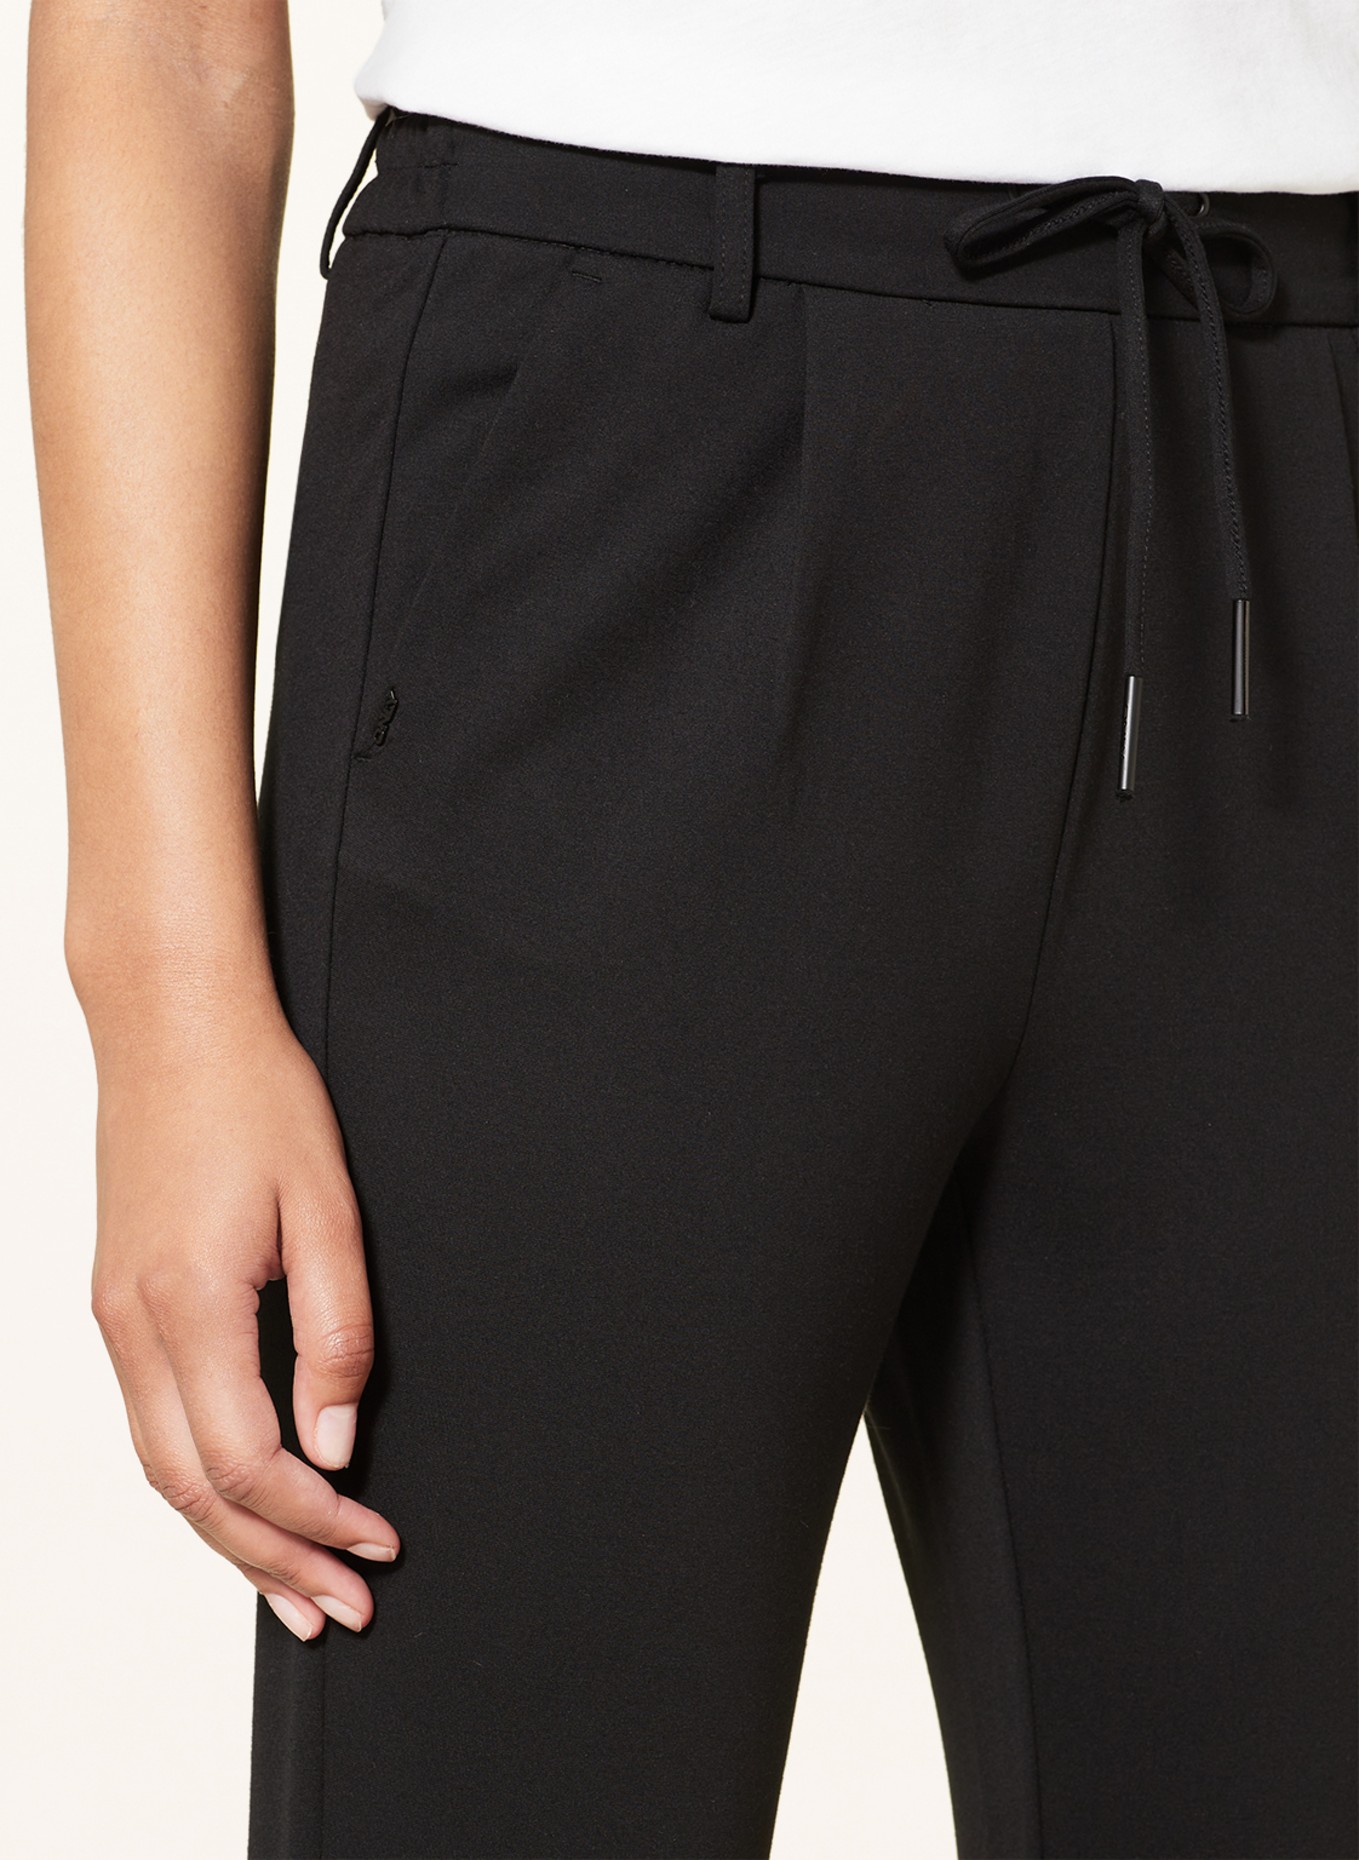 ONLY Jersey pants in jogger style, Color: BLACK (Image 5)